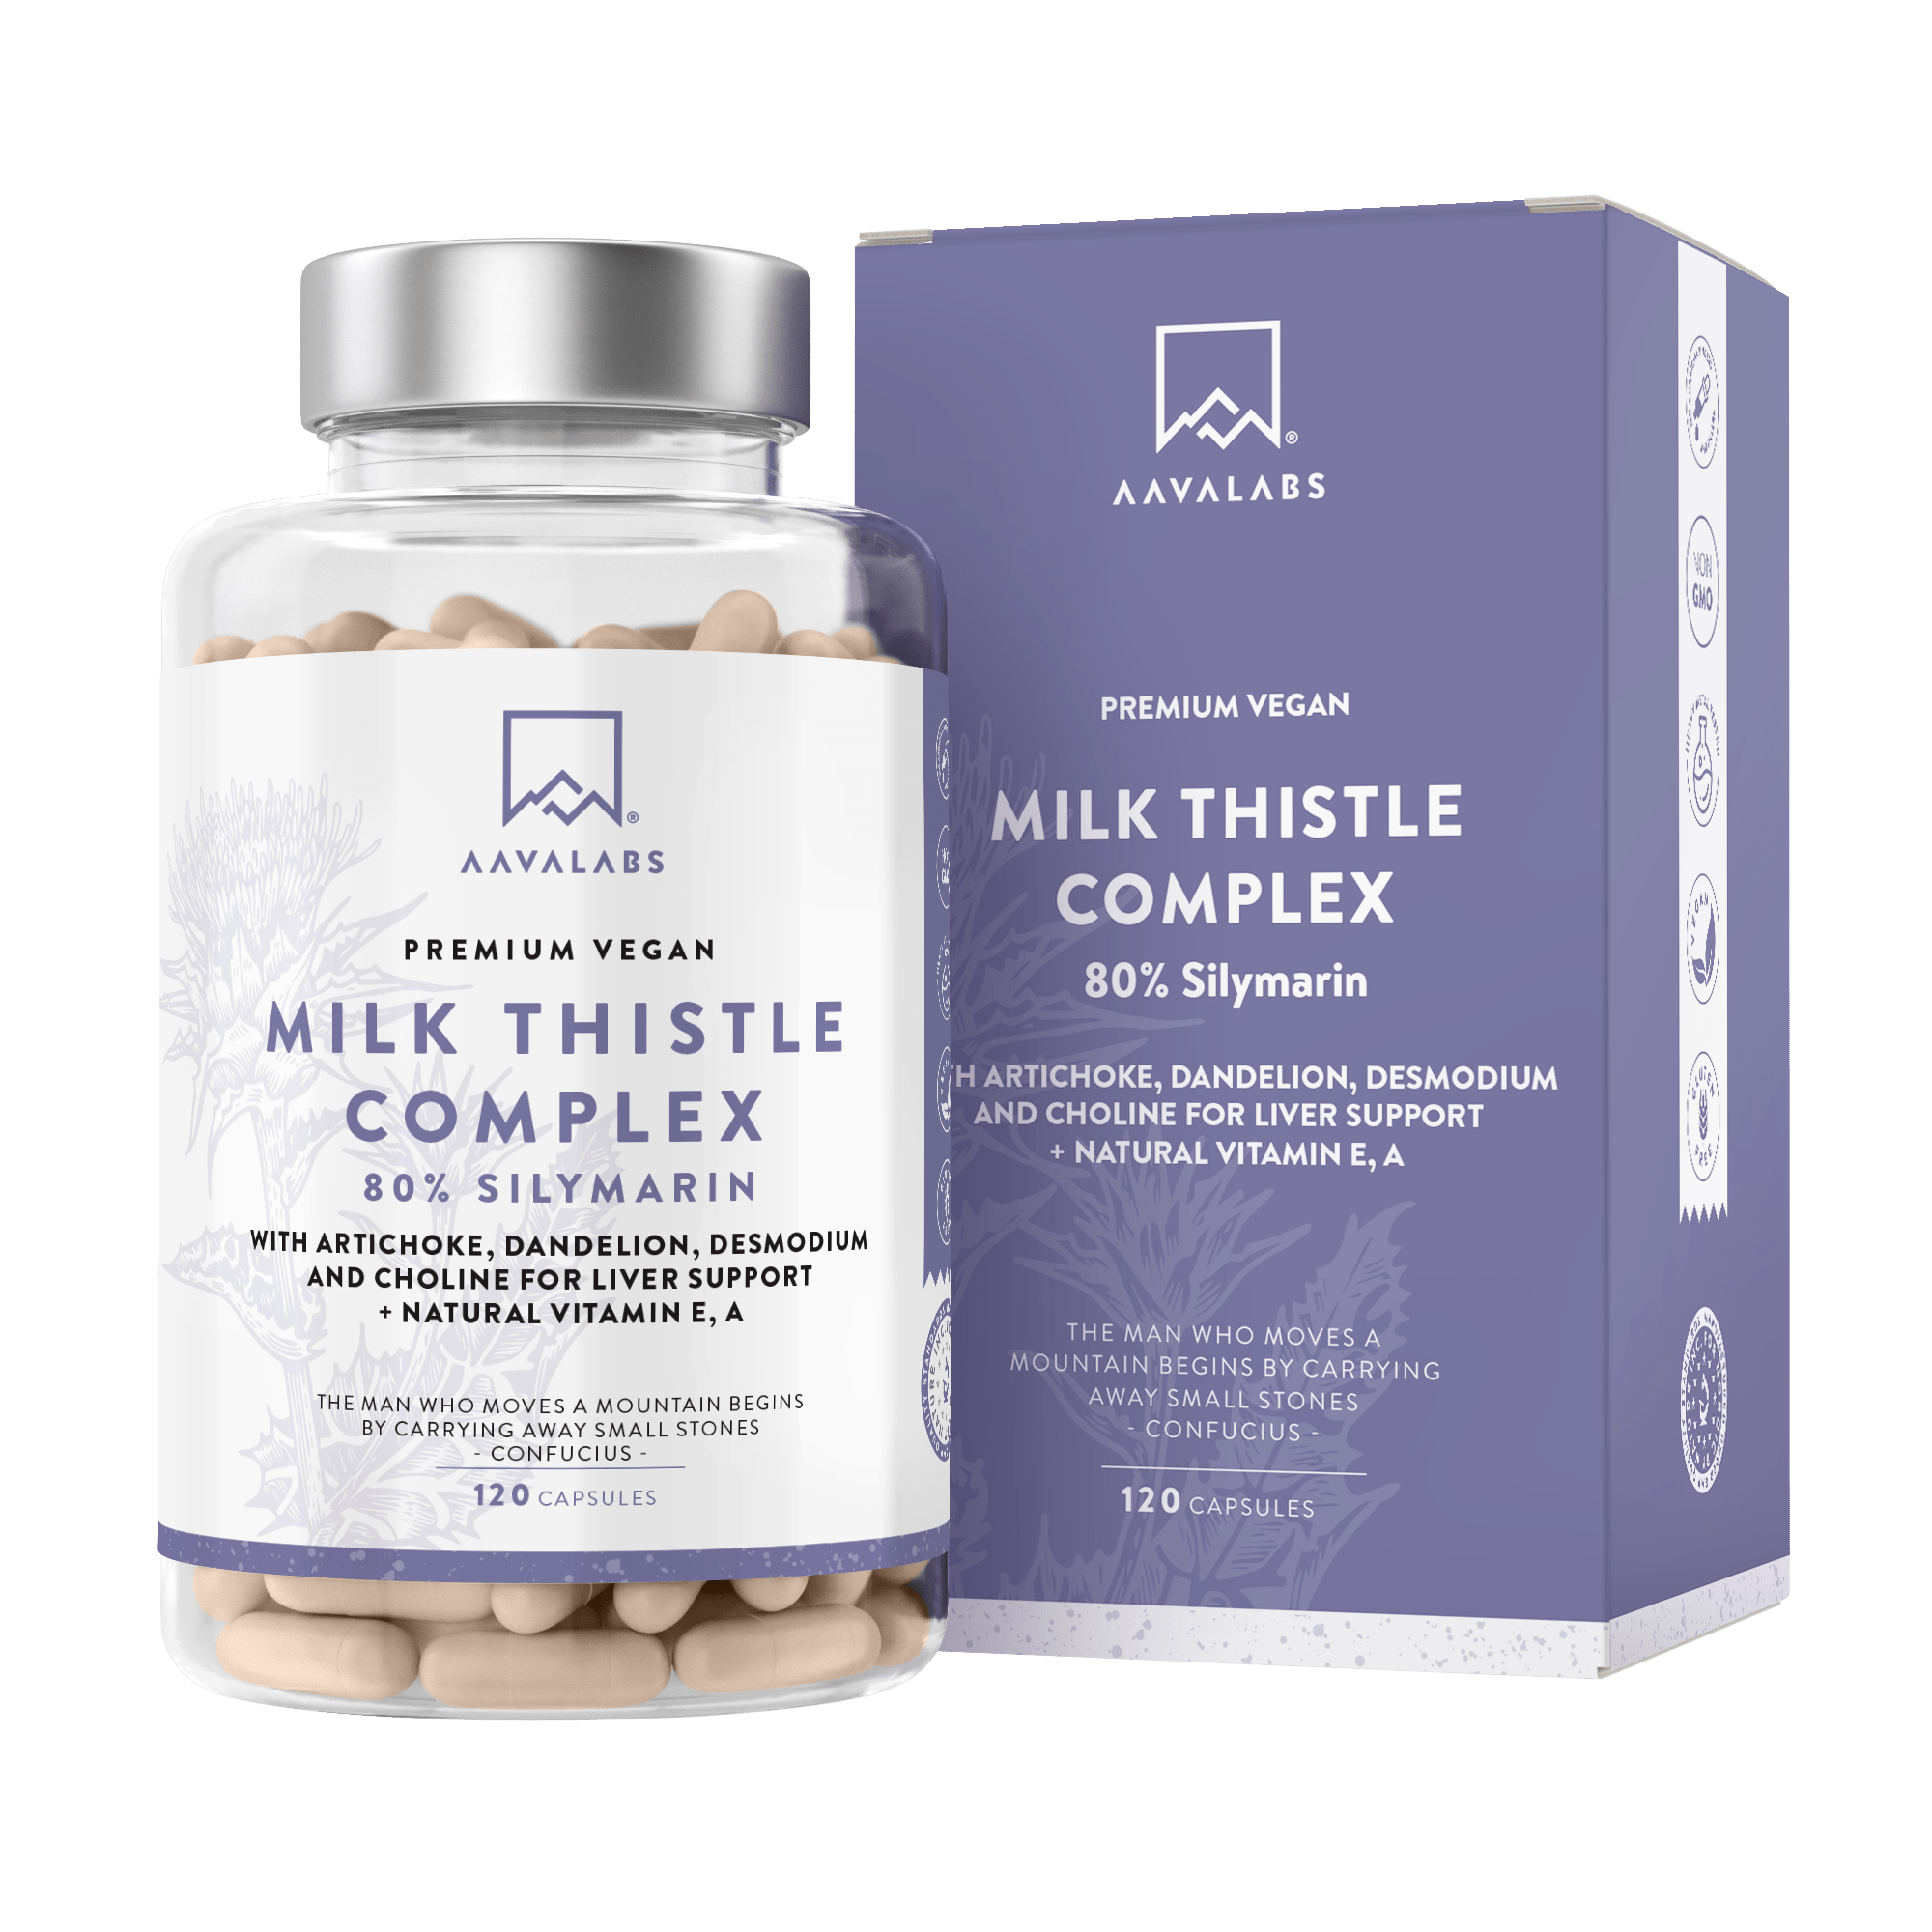 MILK THISTLE COMPLEX - AAVALABS